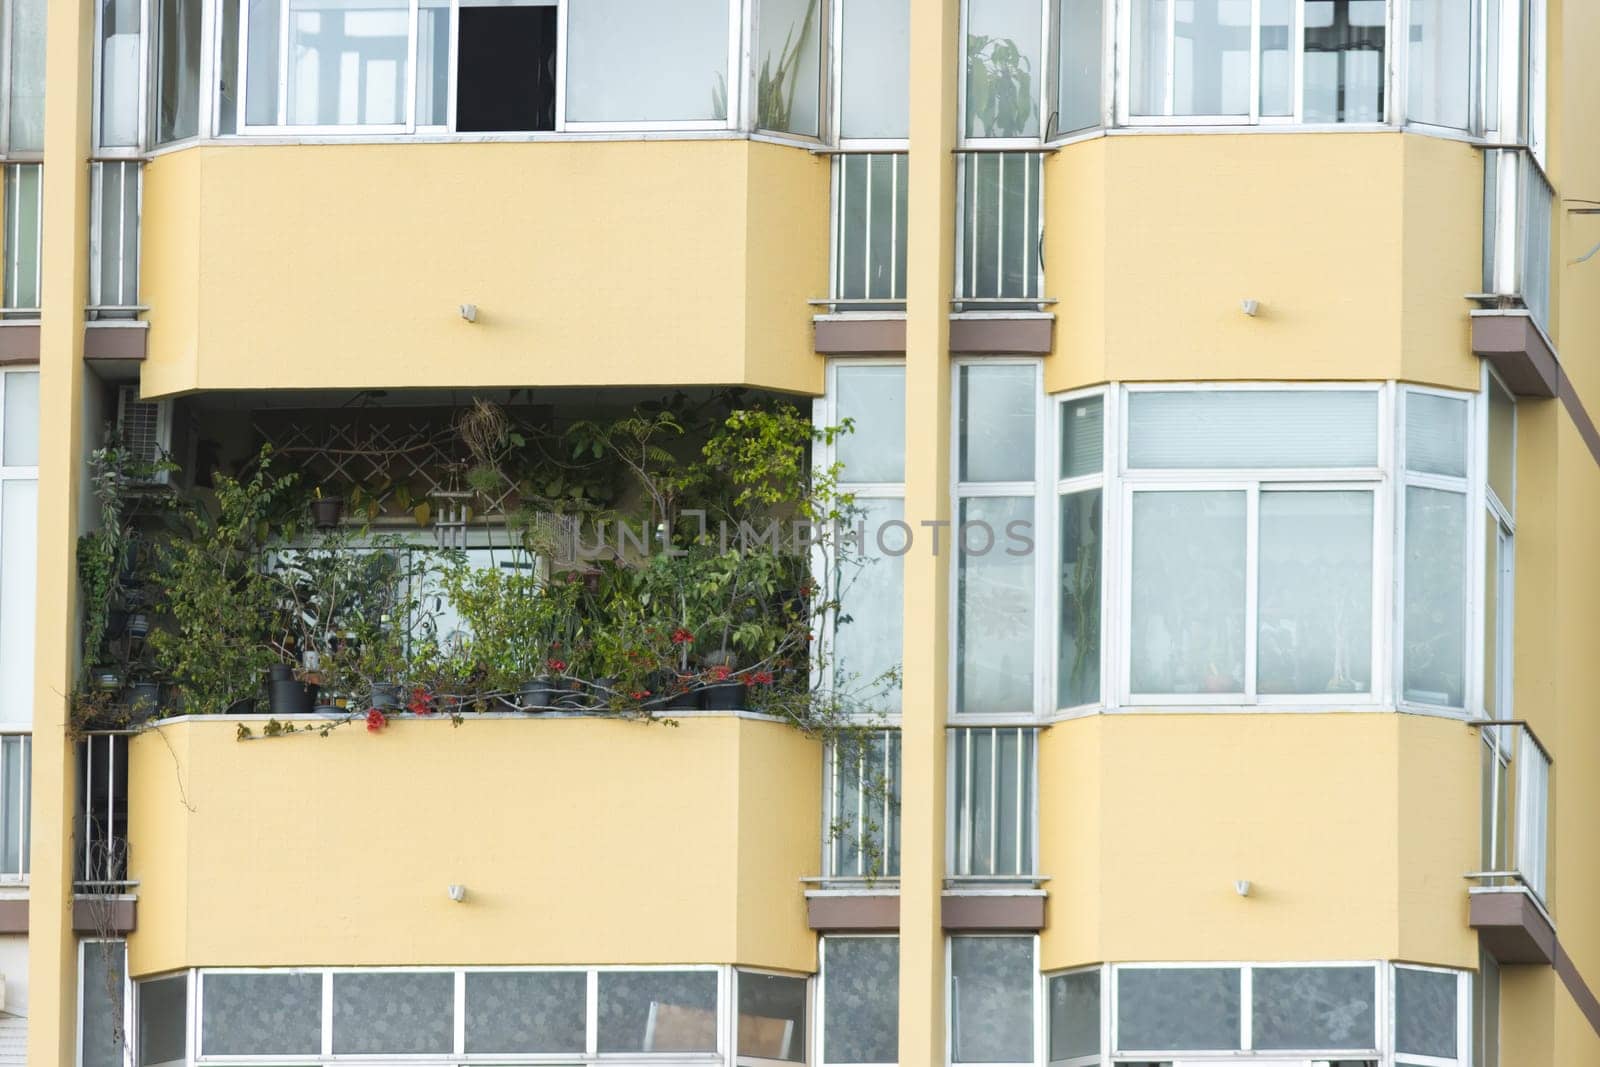 A yellow building with a balcony and a green roots insidef. The balcony has a potted plant on it